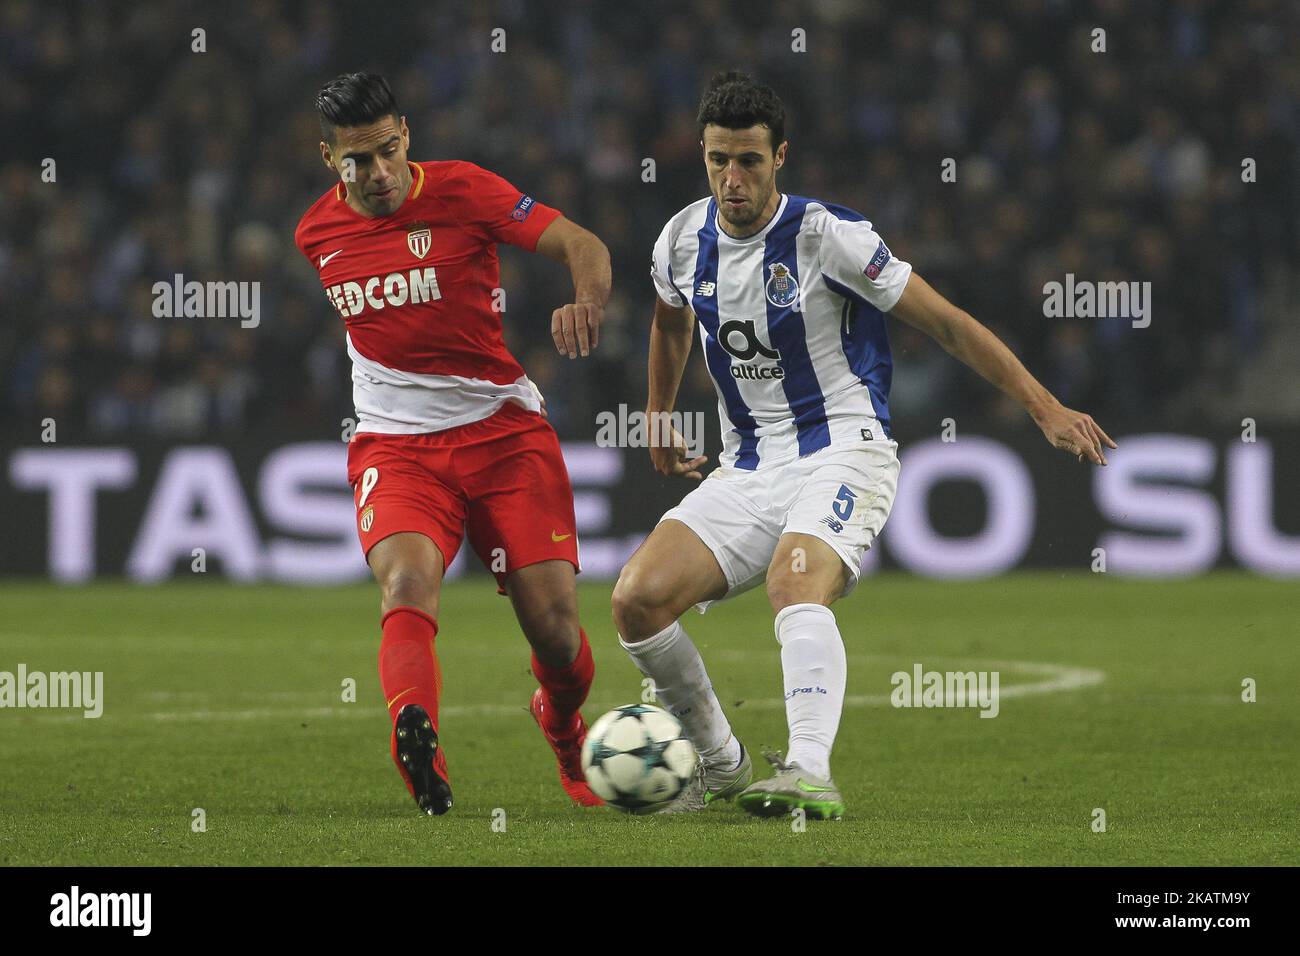 Radamel Falcao forward of AS Monaco FC (L) with Porto's Spanish defender Ivan Marcano (R) during the UEFA Champions League Group G match between FC Porto and AS Monaco FC at Dragao Stadium on December 6, 2017 in Porto, Portugal. (Photo by Pedro Lopes / DPI / NurPhoto) Stock Photo